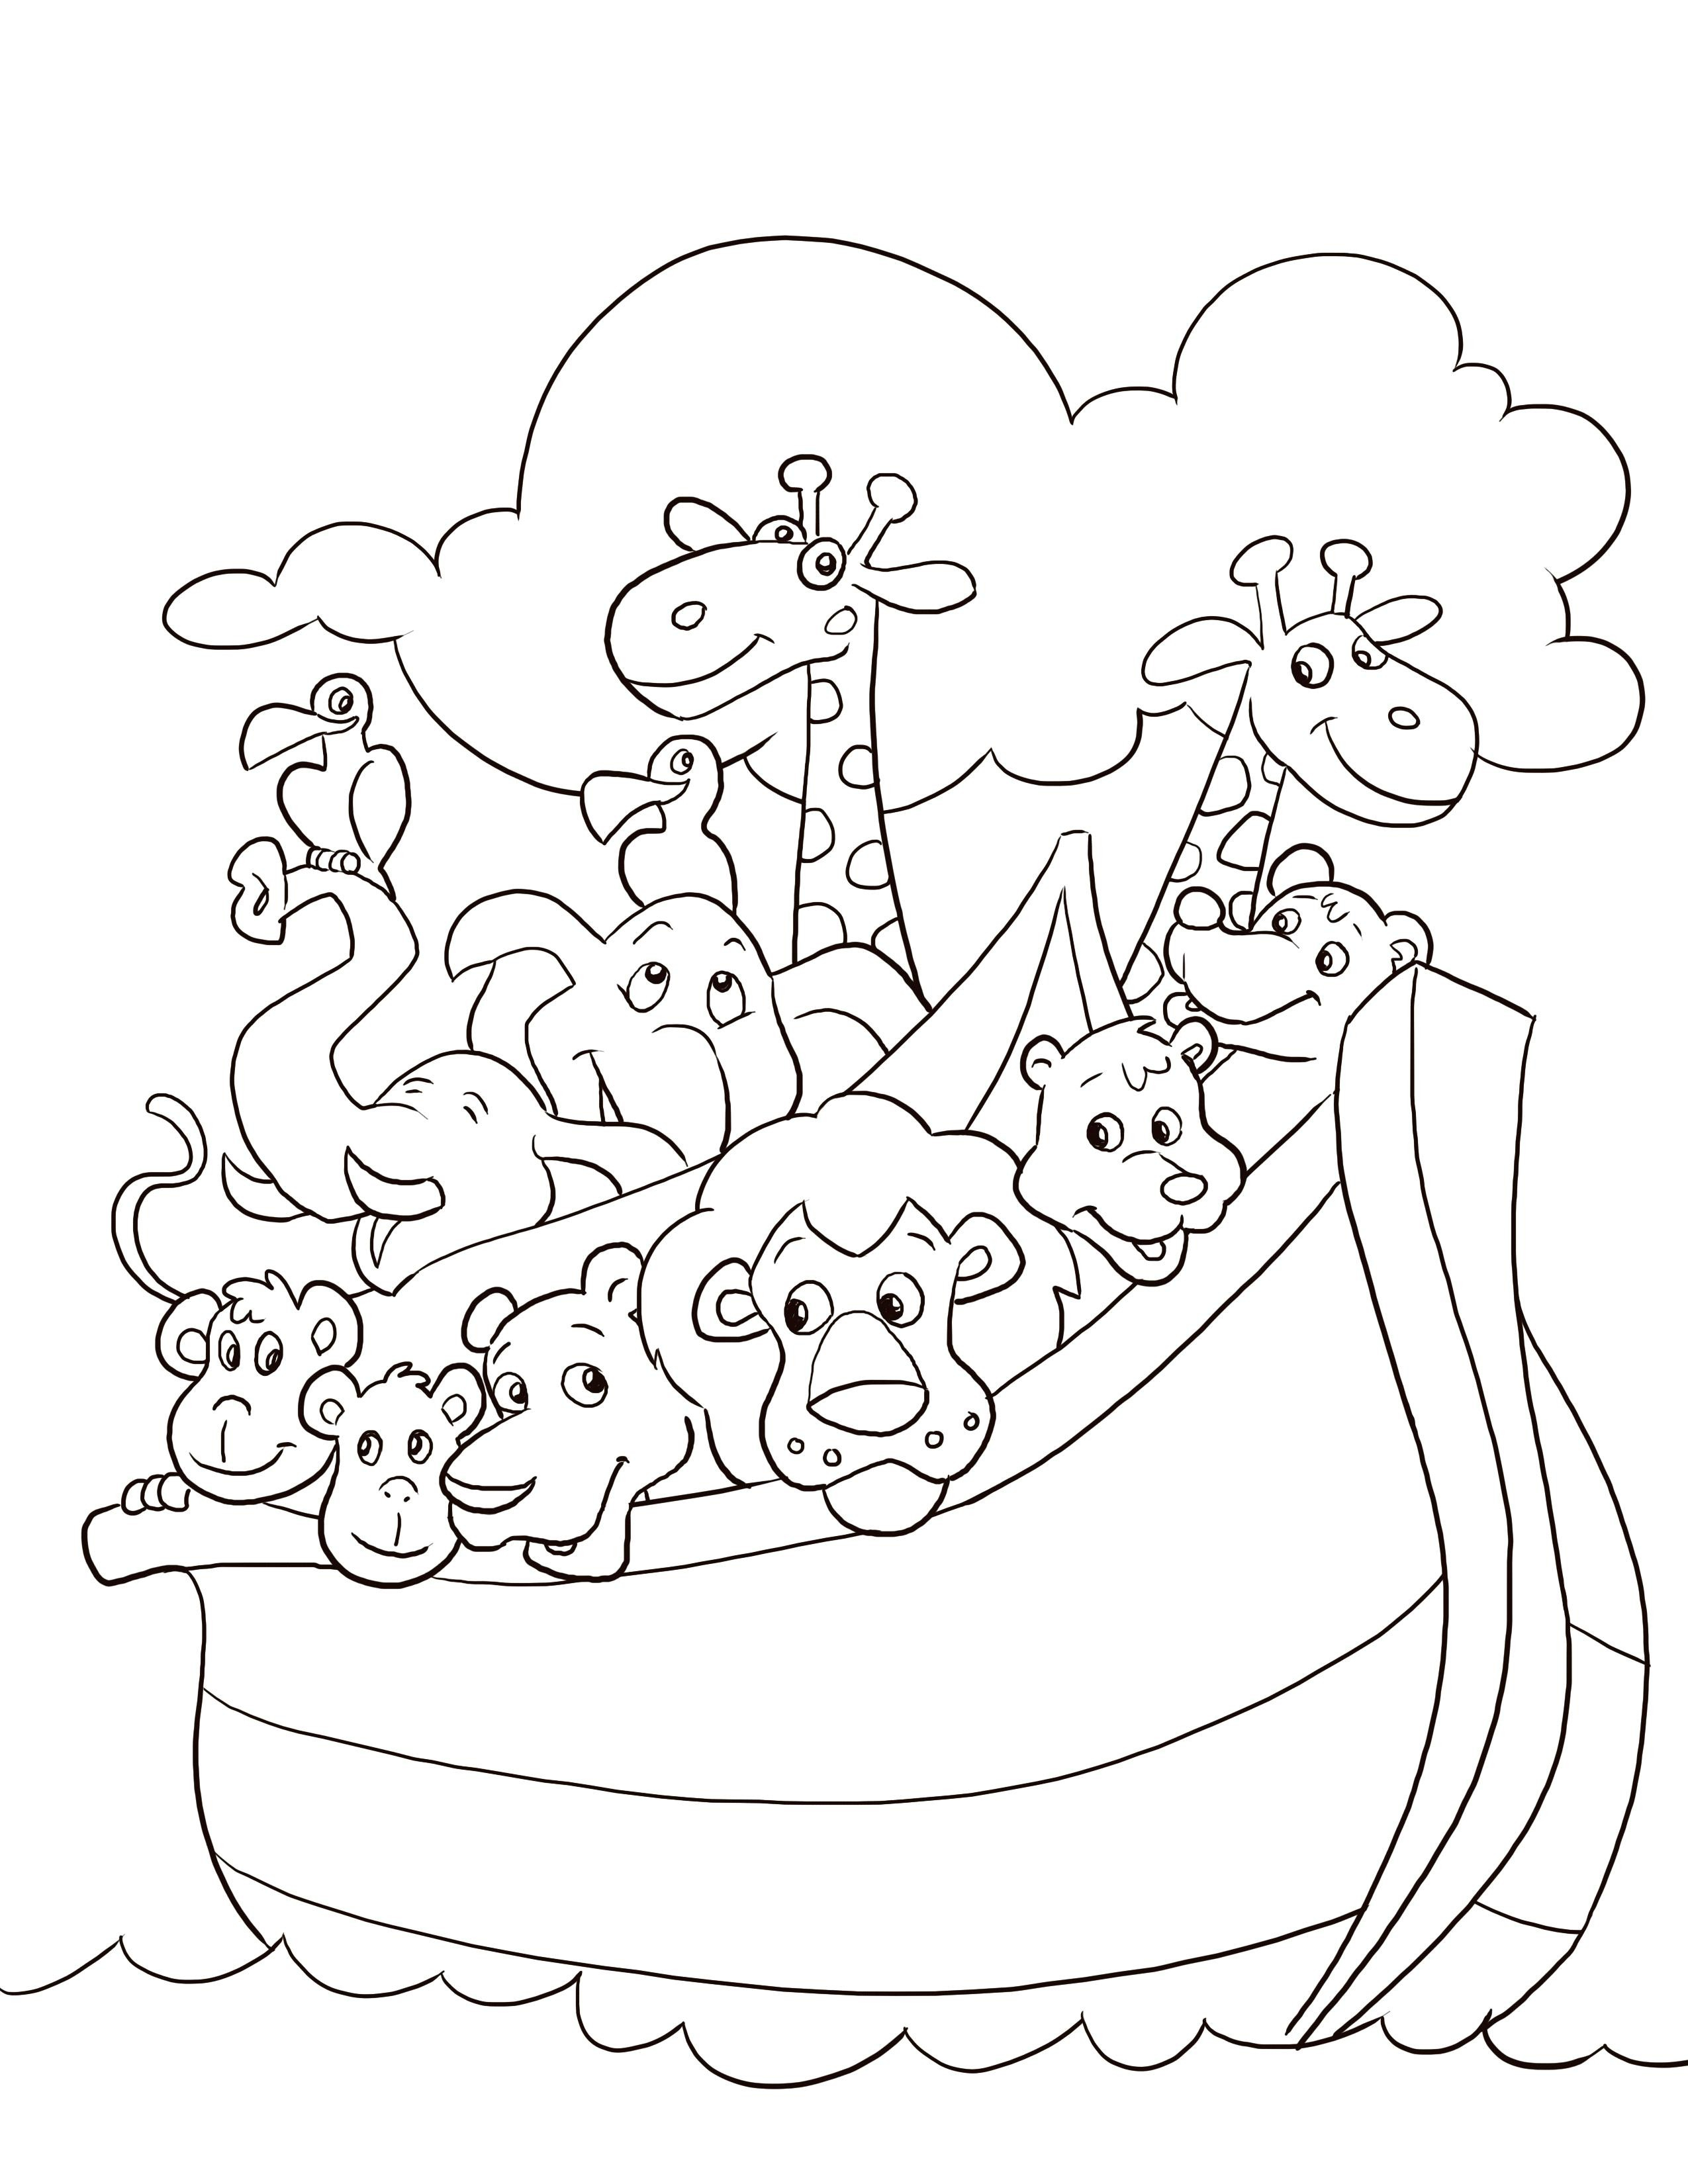 25+ Inspiration Photo of Bible Story Coloring Pages - entitlementtrap.com